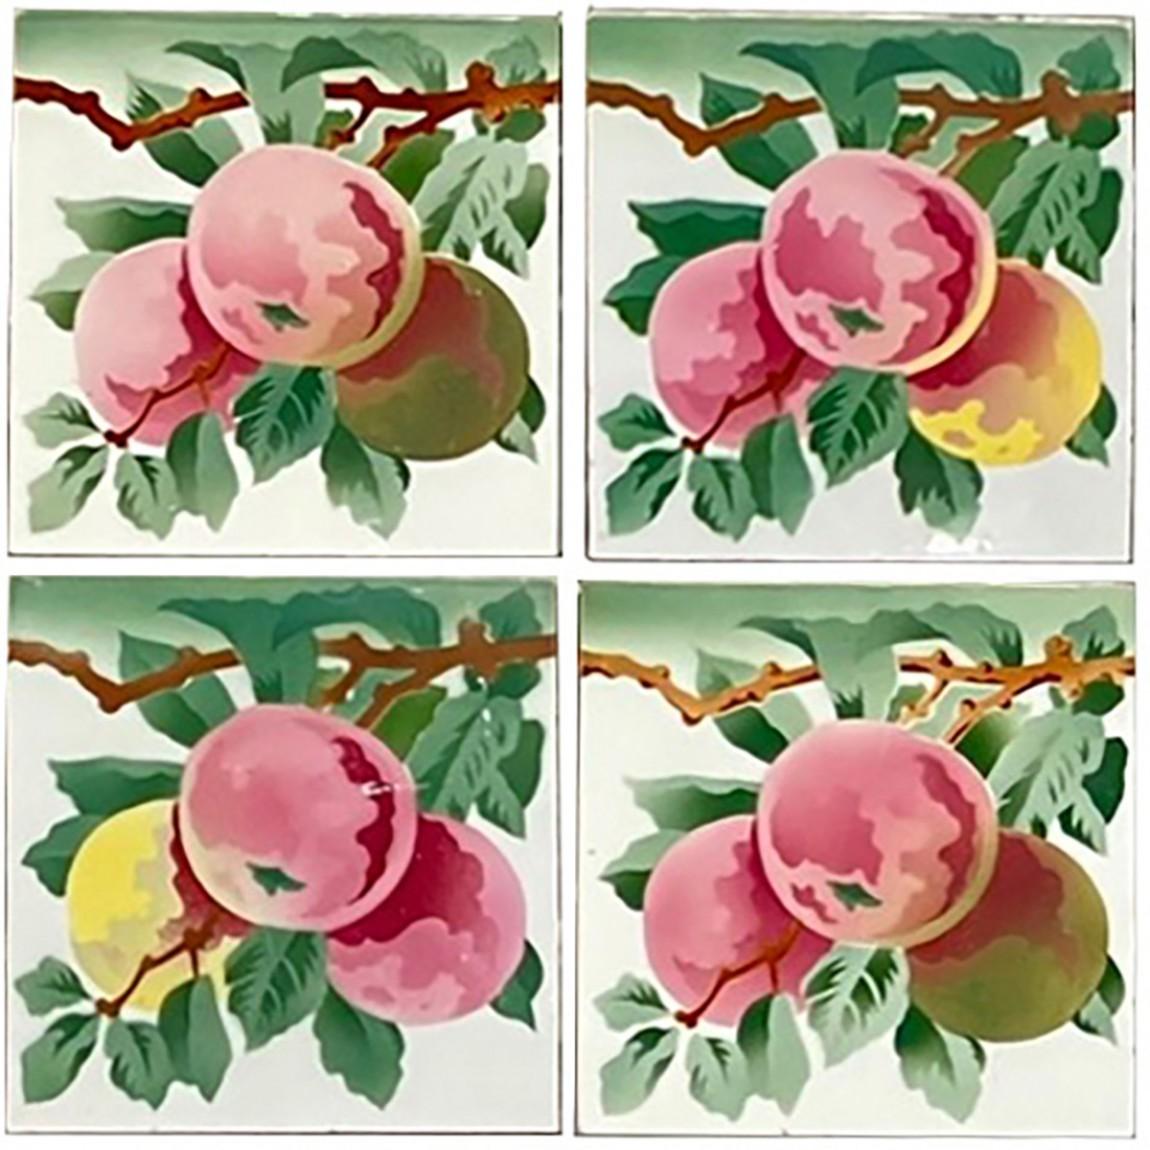 This is a amazing and unique set of 21 antique handmade ceramic tiles. Manufactured in Belgium, circa 1920s. Stylized design of handpainted apples. These tiles would be charmingly displayed on easels, framed or incorporated into a custom tile